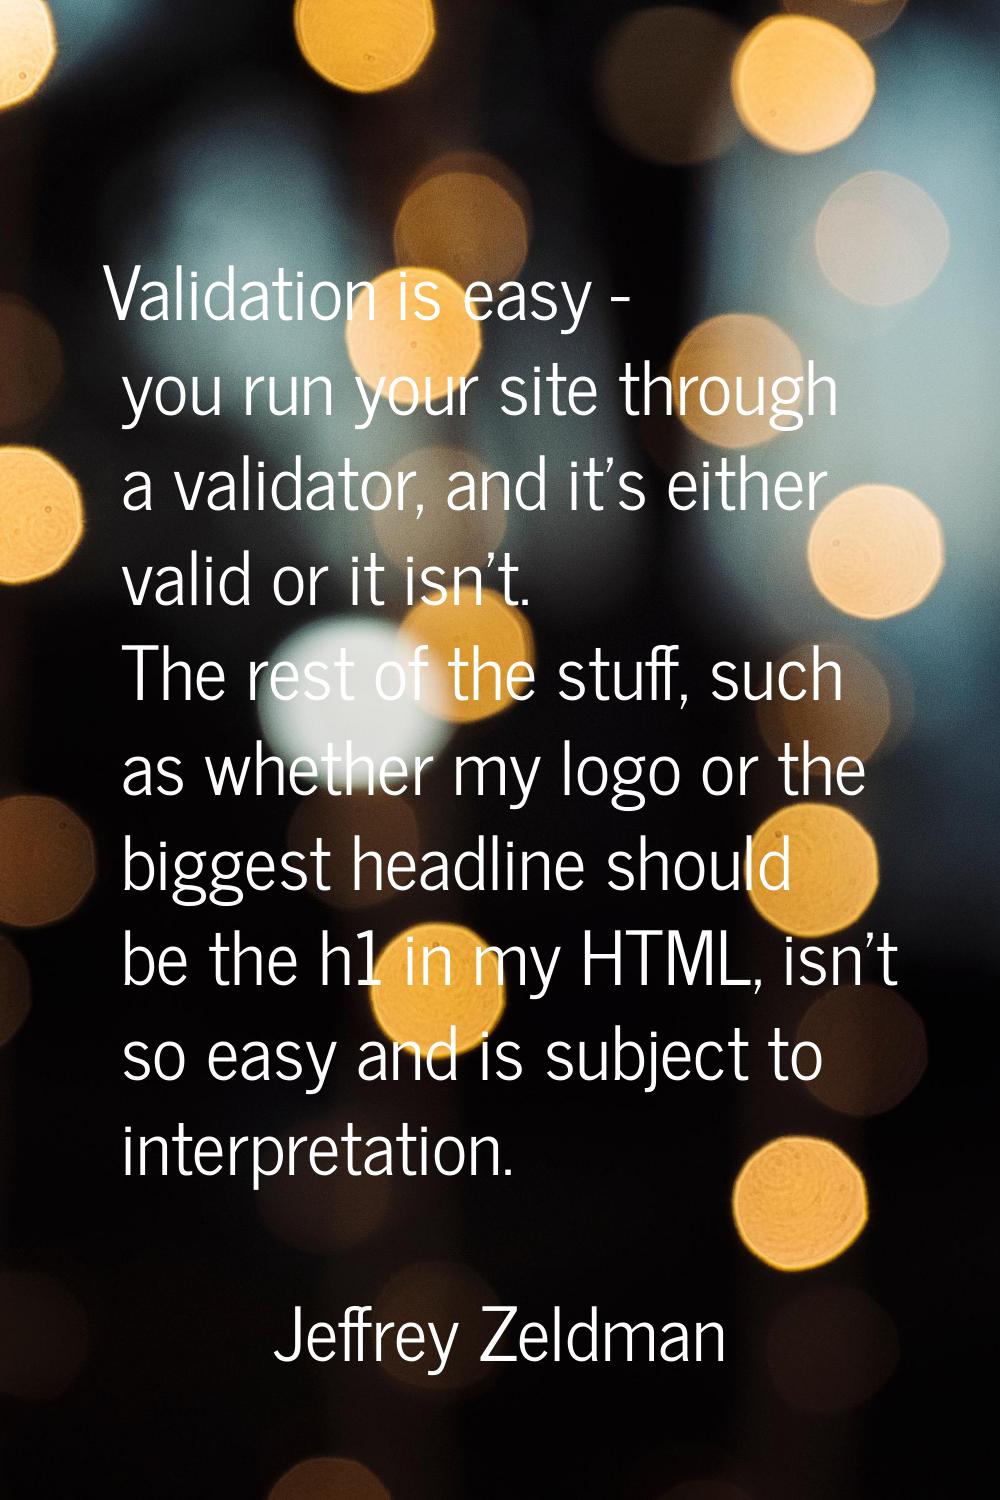 Validation is easy - you run your site through a validator, and it's either valid or it isn't. The 